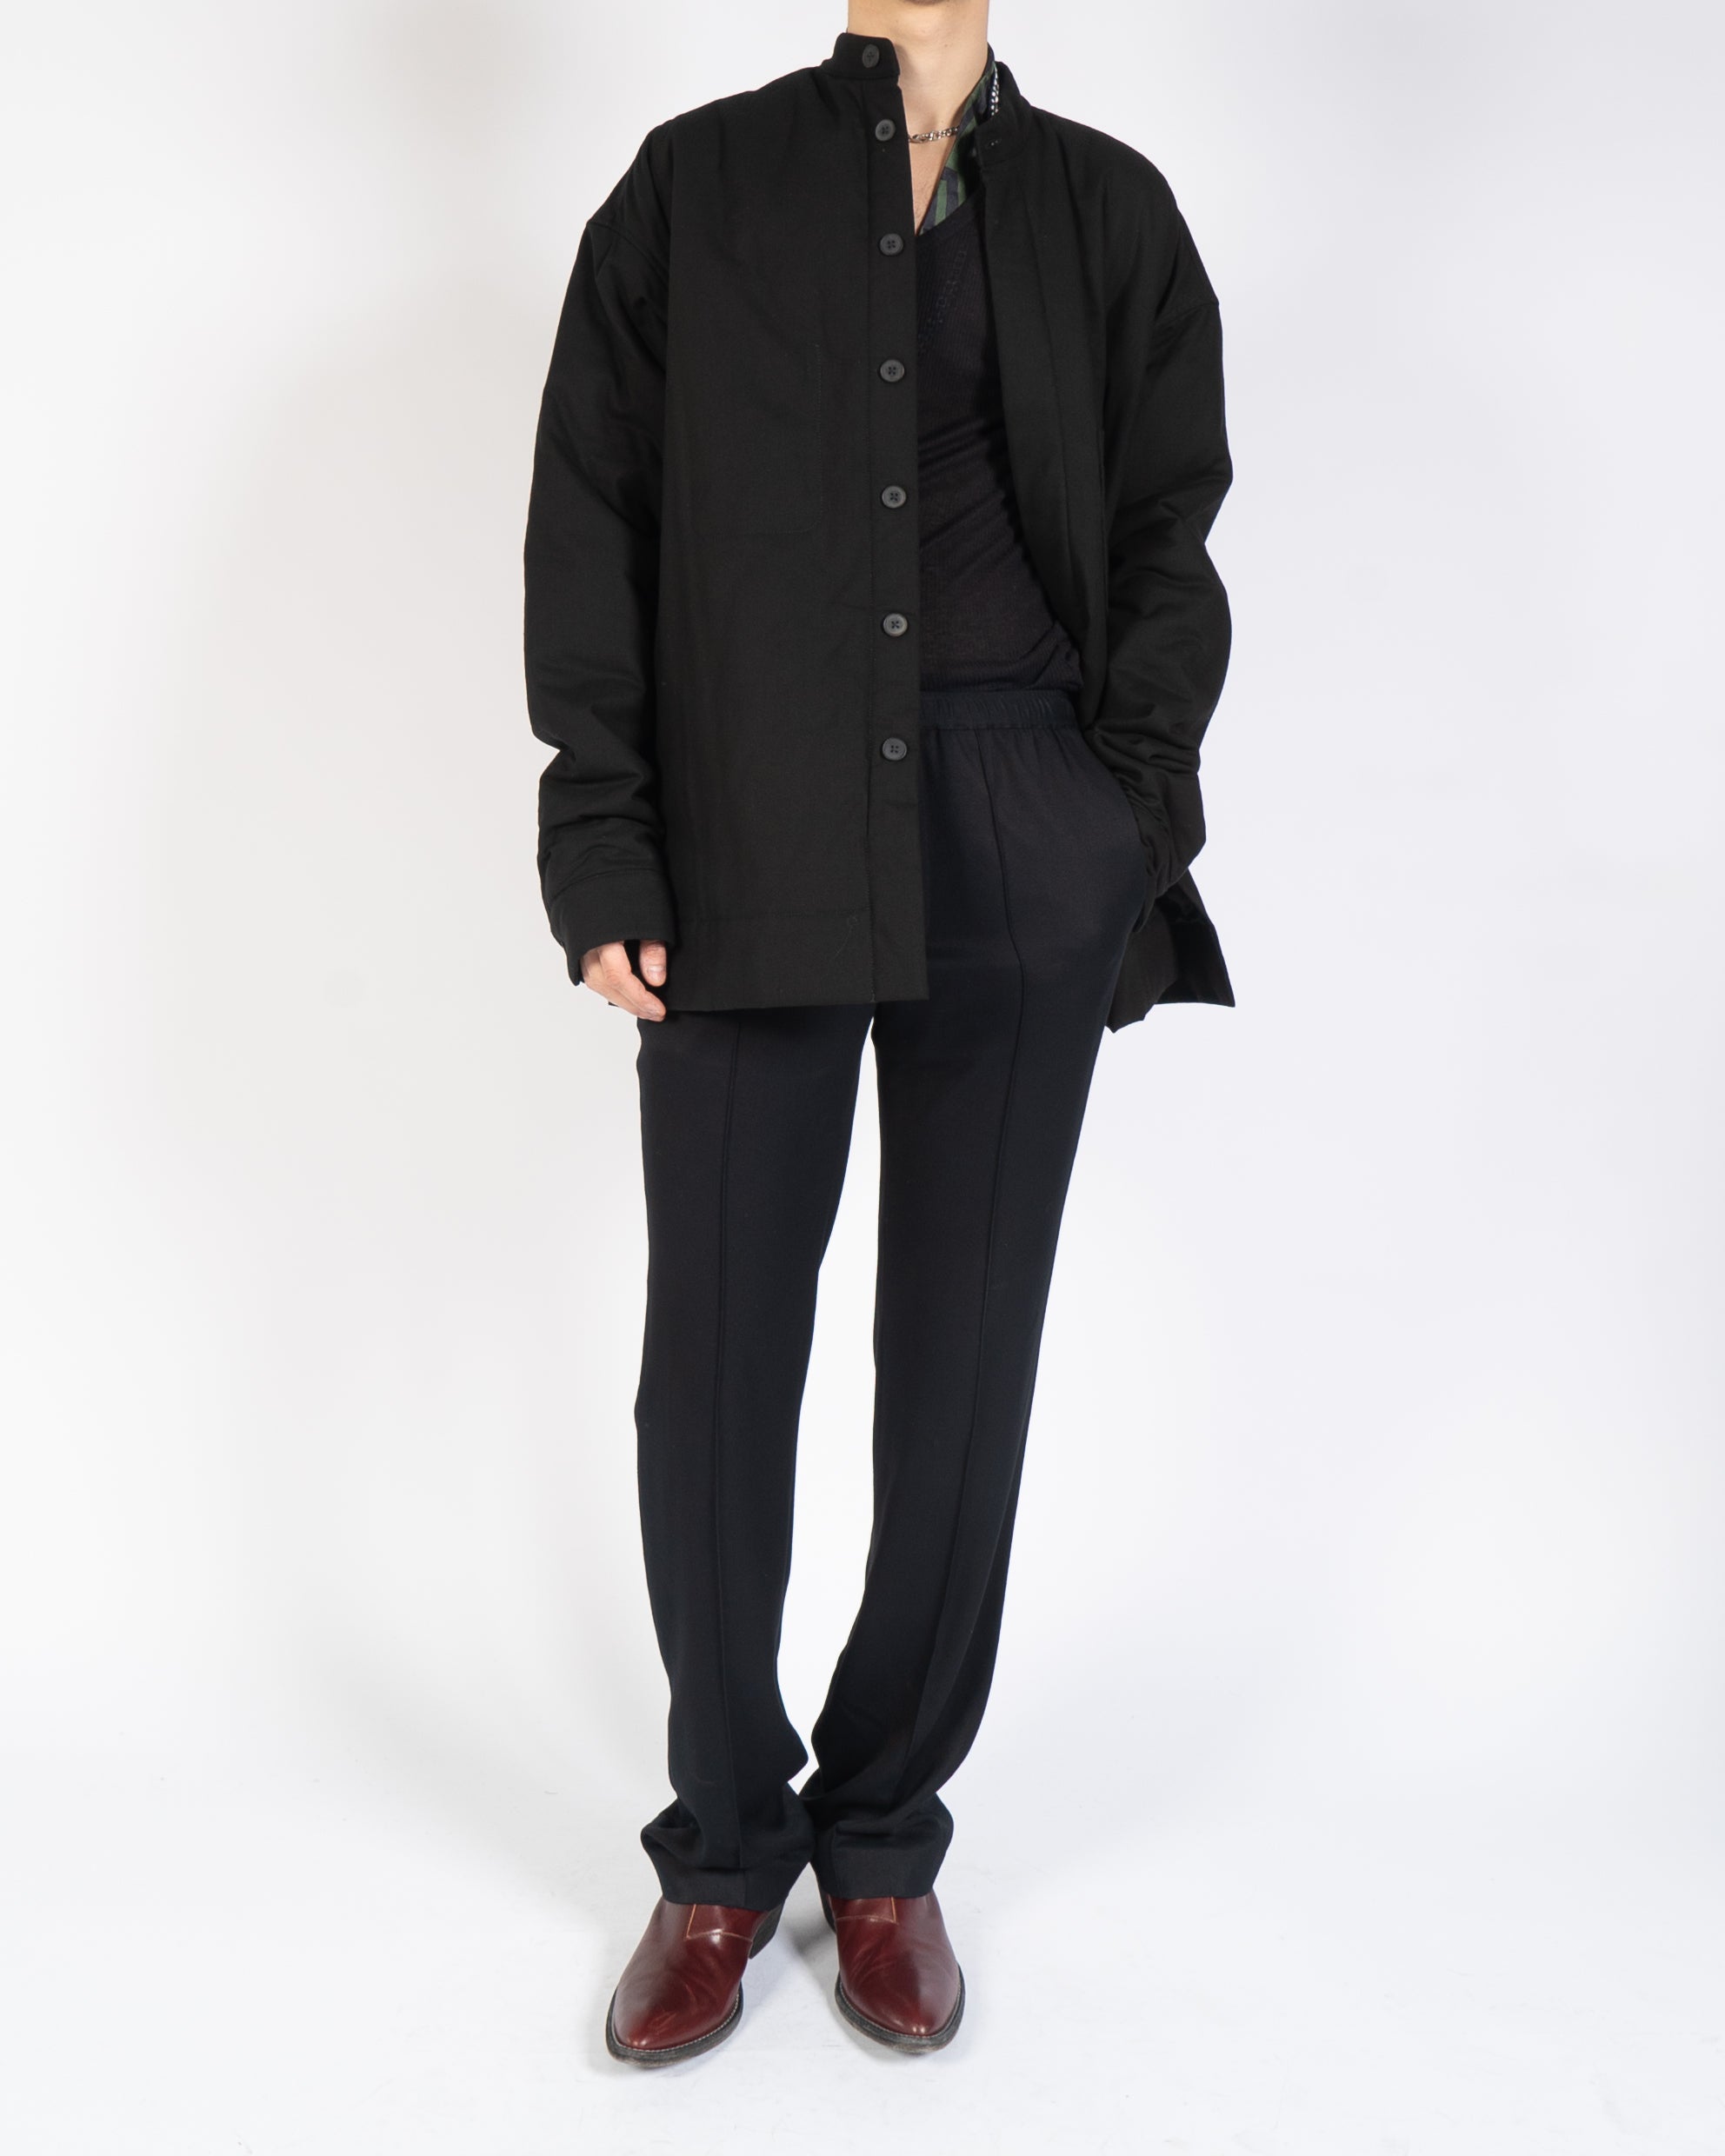 FW20 Oversized Black Embroidered Shirt